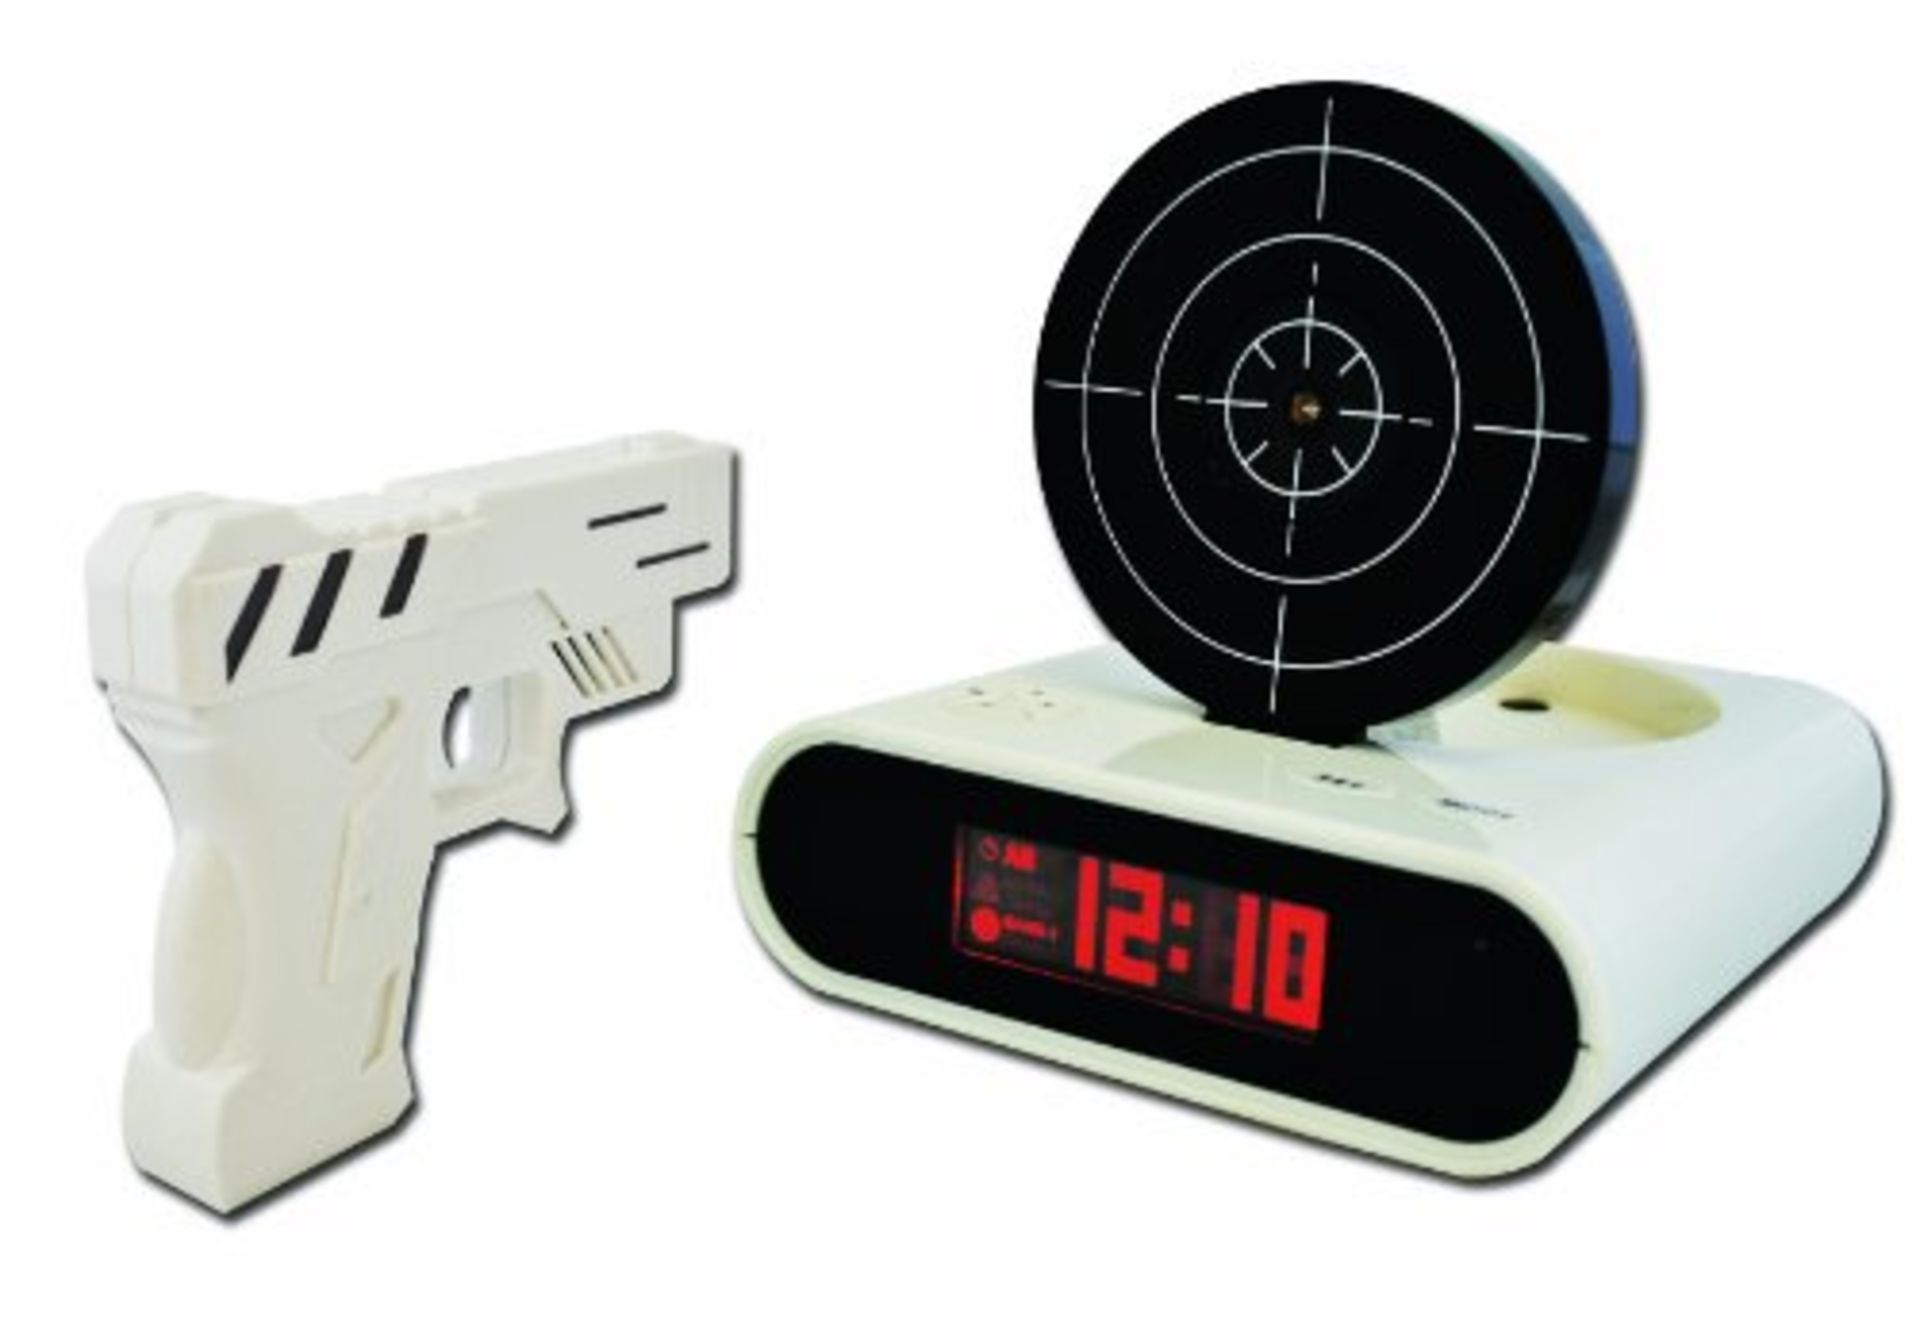 V Grade A Target practice alarm clock complete with electronic gun